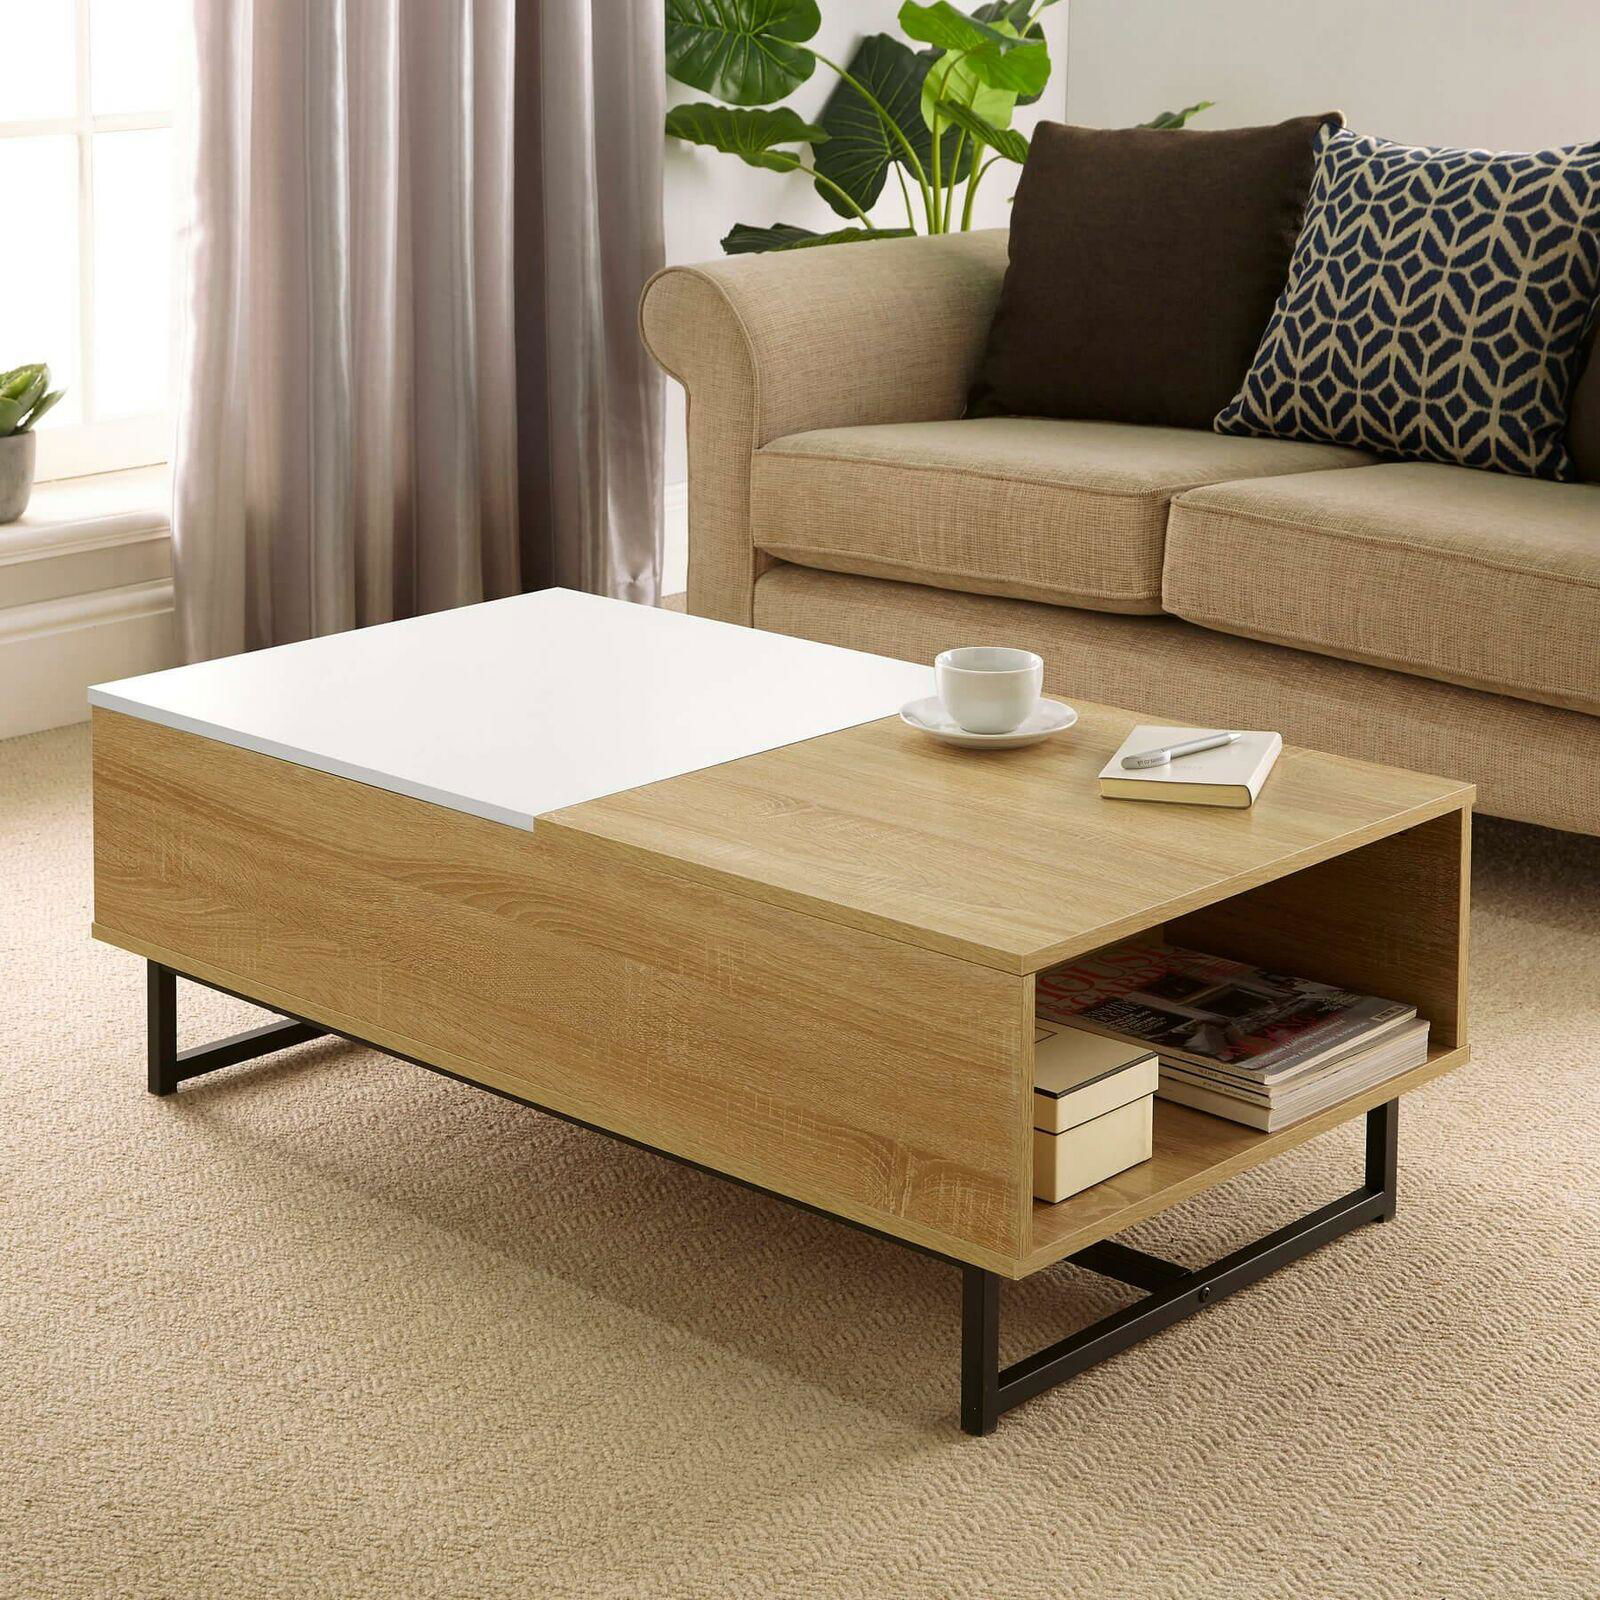 Top lift-up coffee table